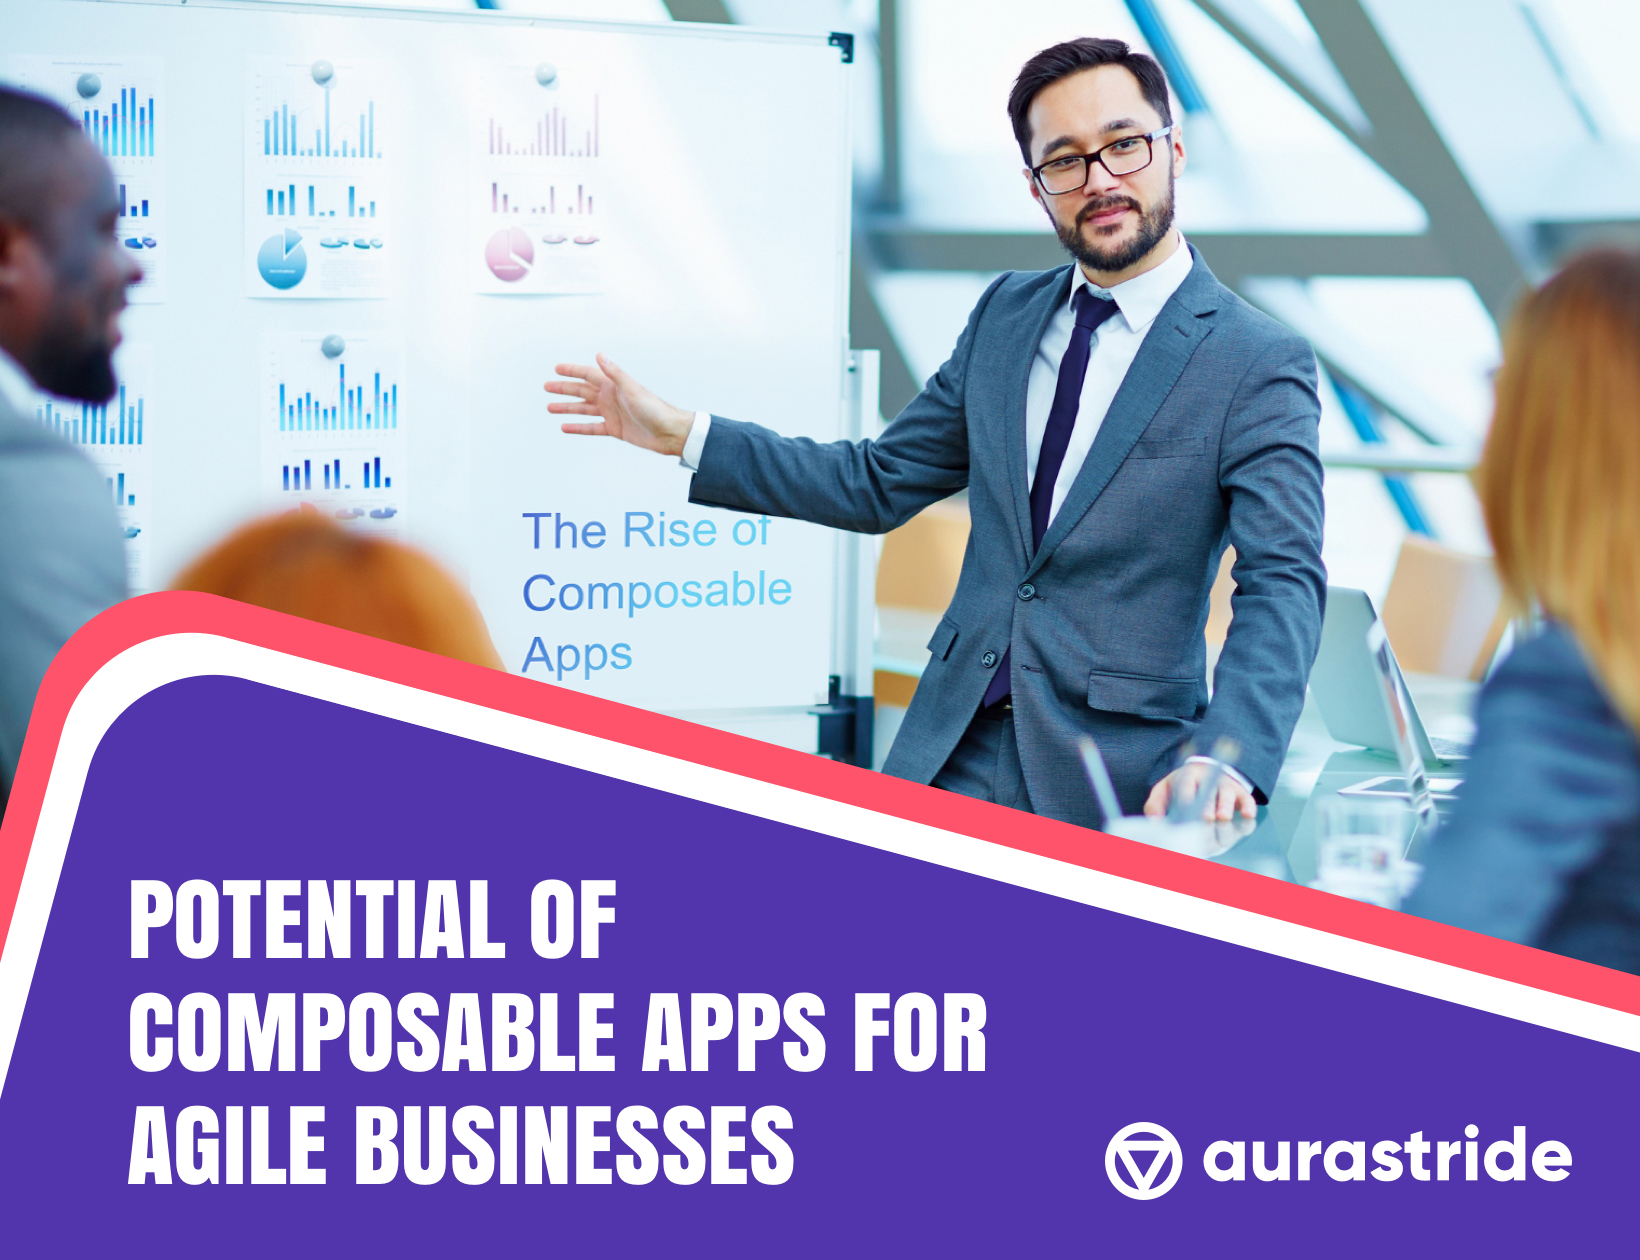 Unpacking the Potential of Composable Apps for Agile Businesses